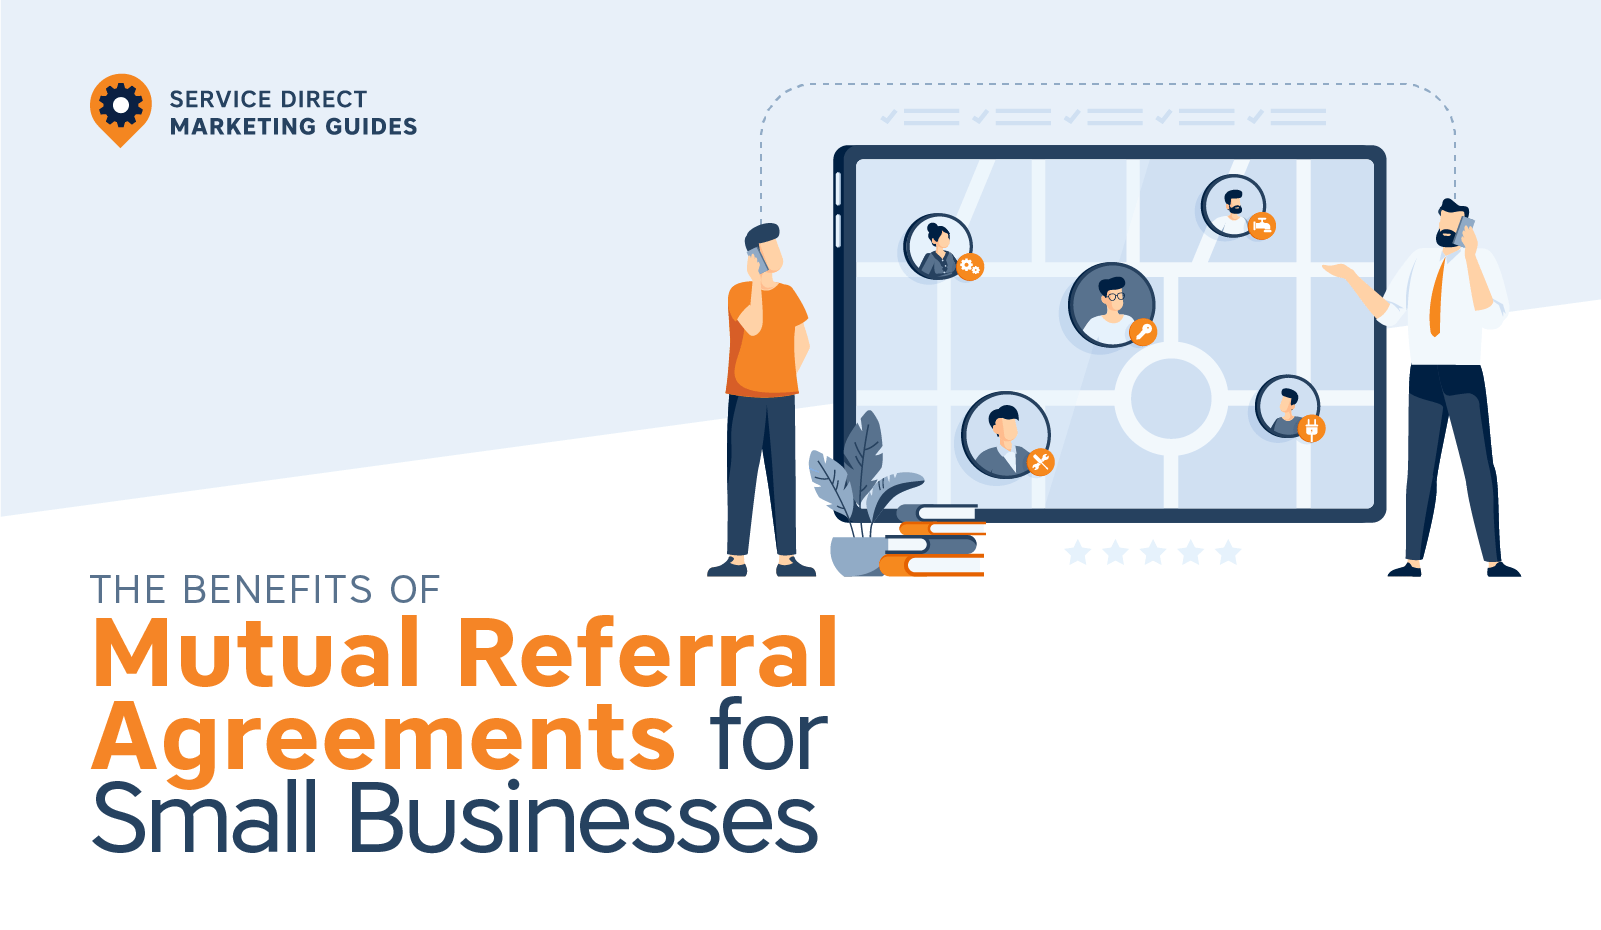 The Benefits of Mutual Referral Agreements for small businesses header